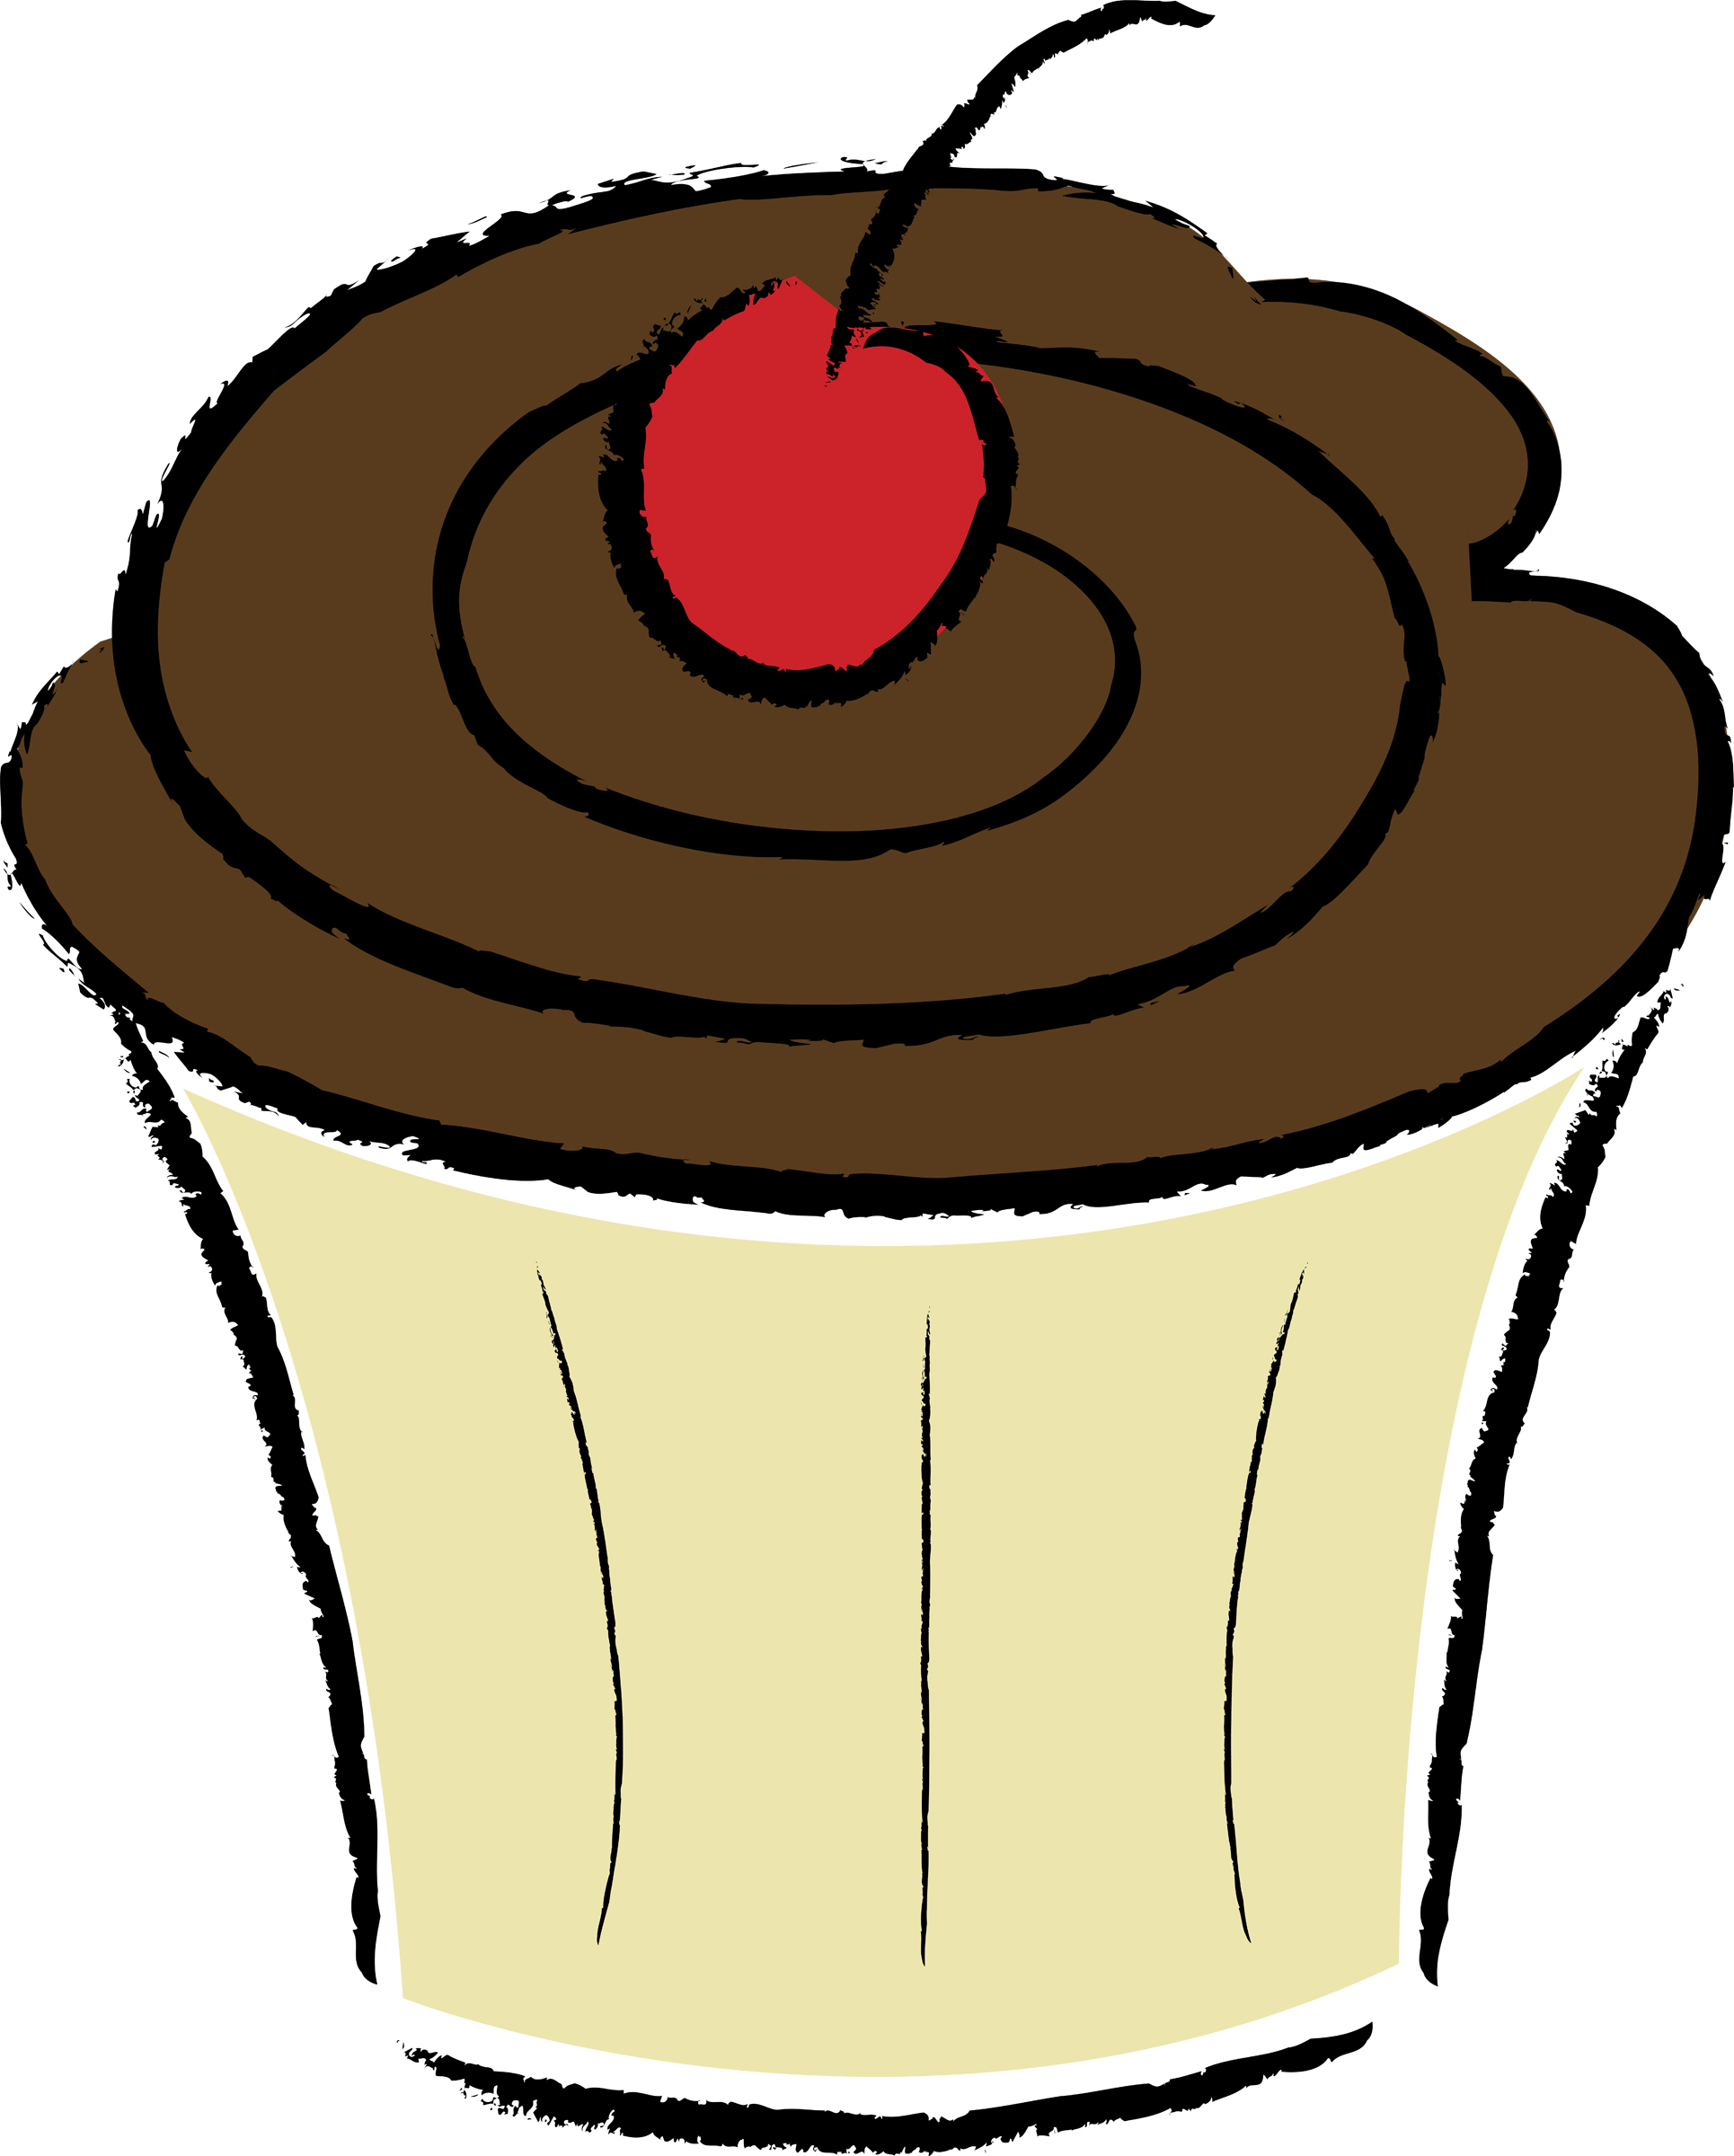 home baking clipart - photo #35